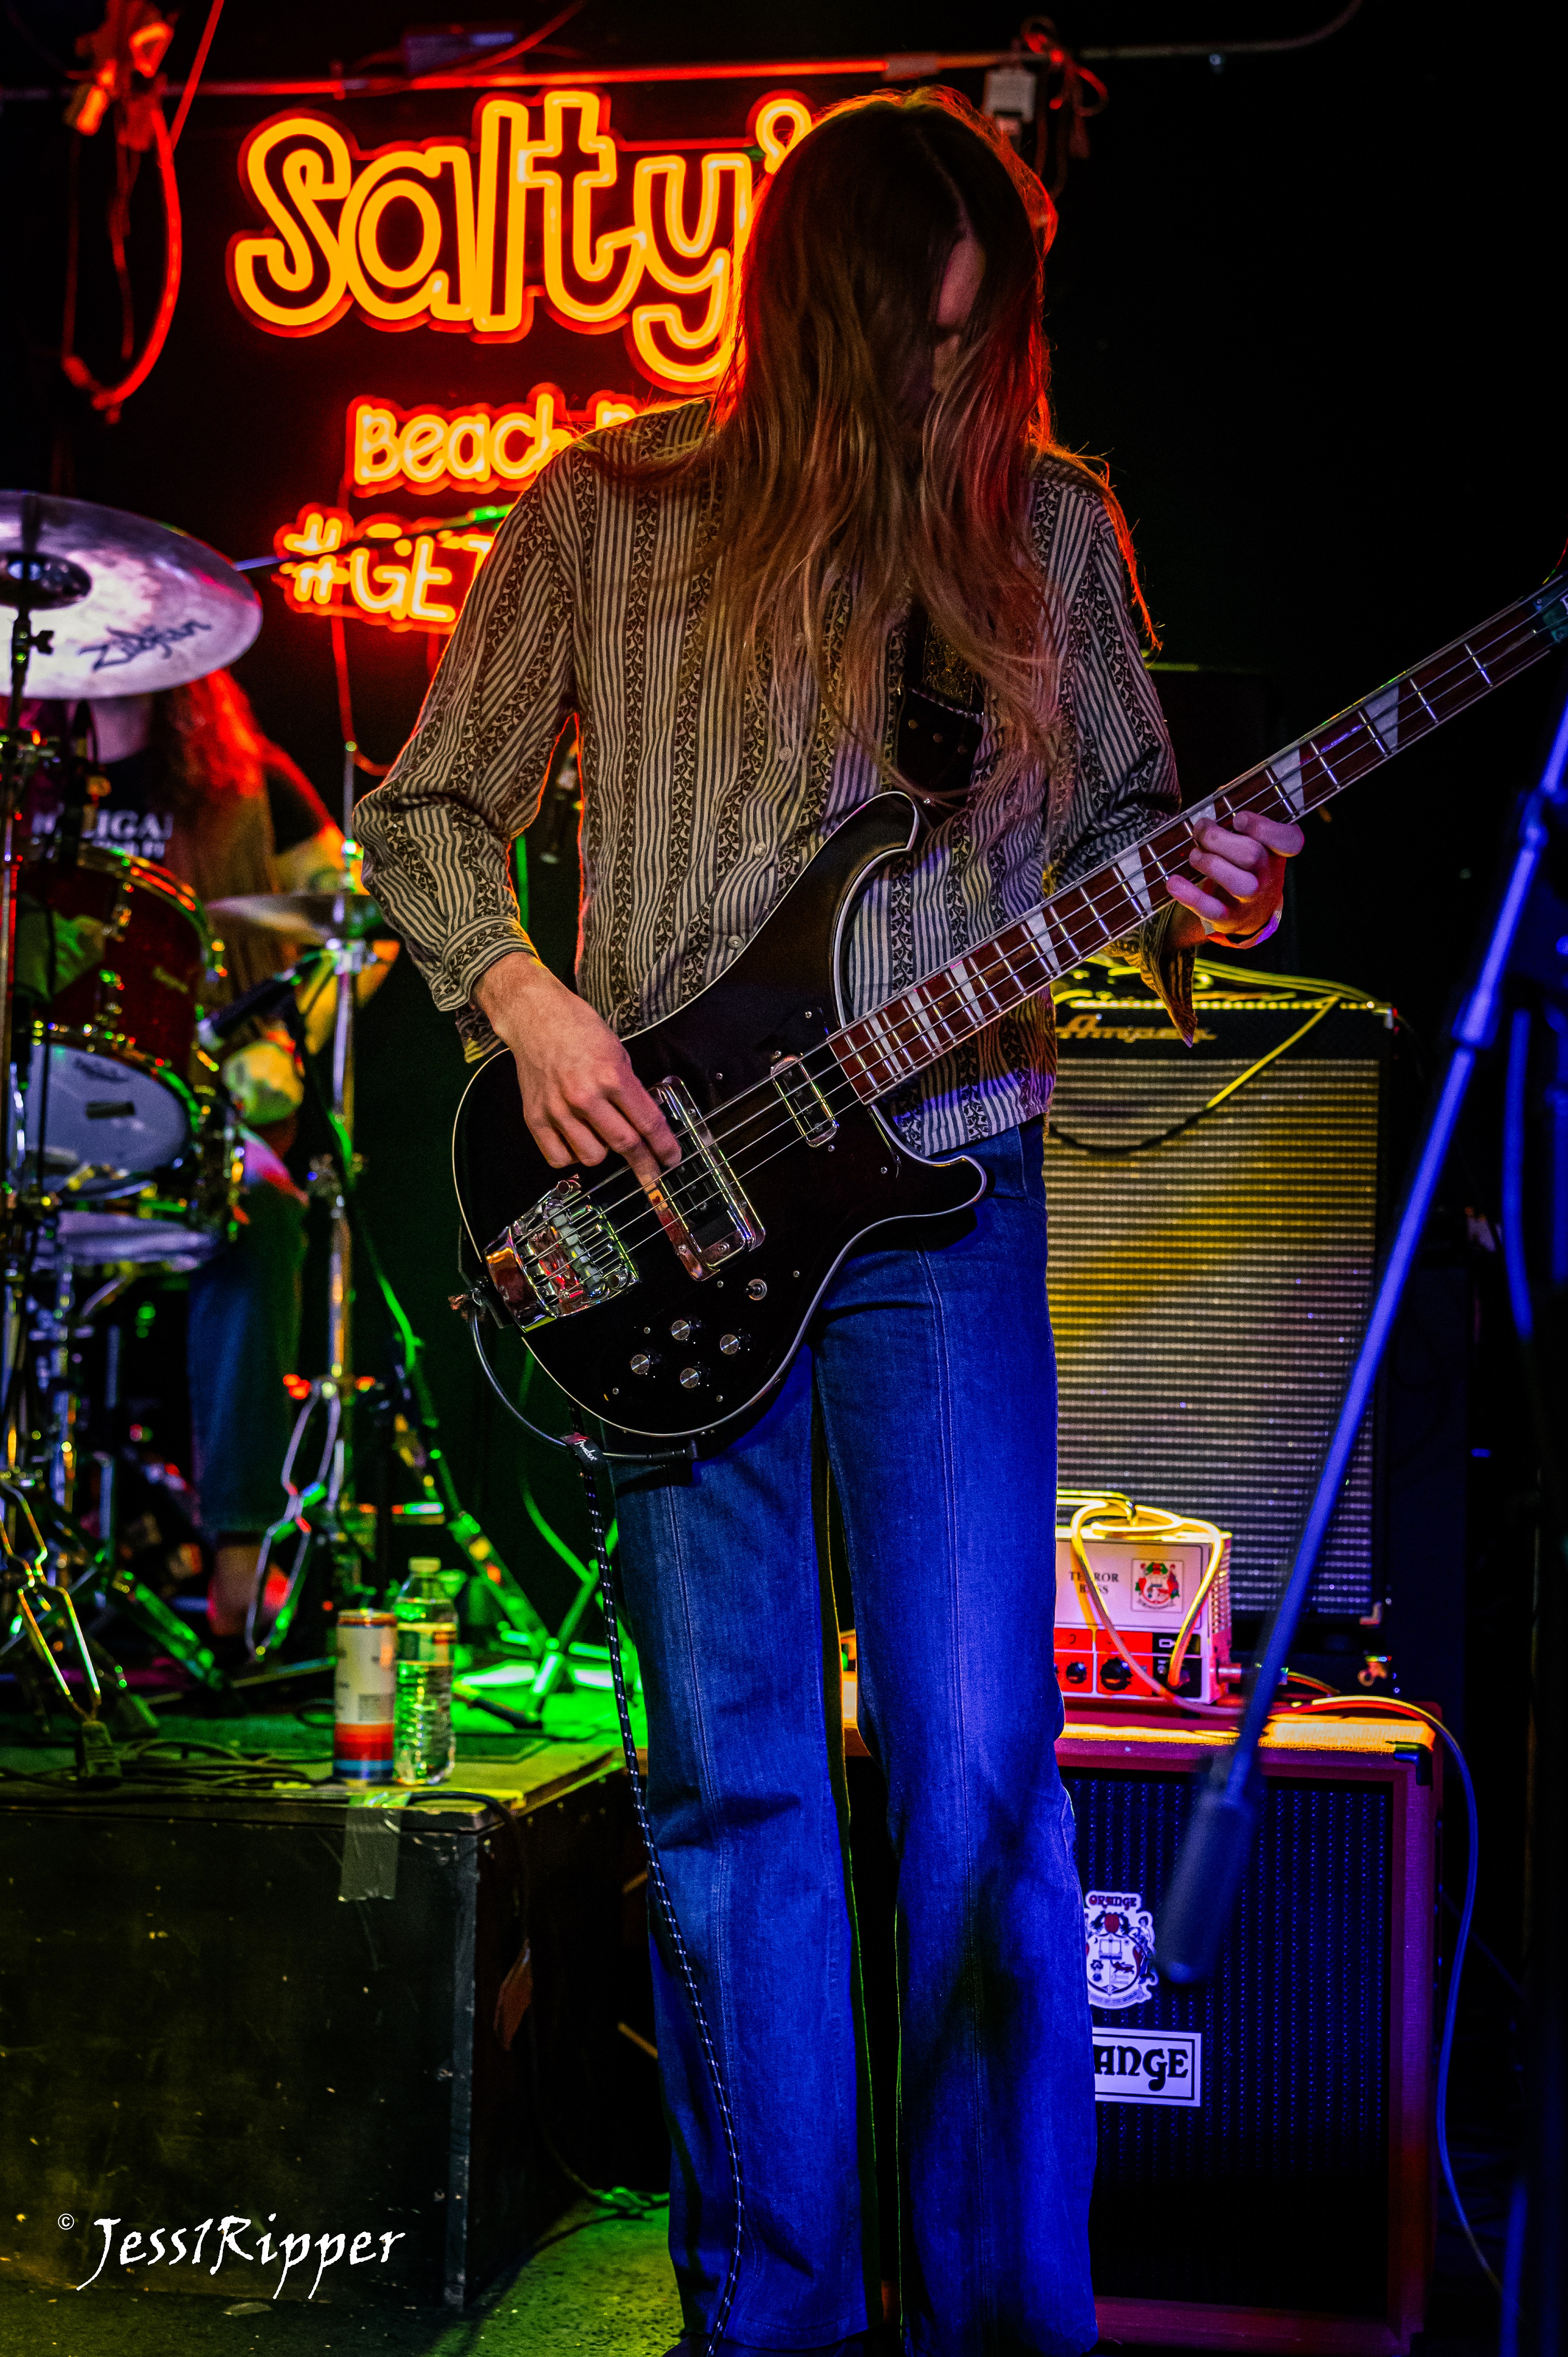 Photos: Ruby The Hatchet, Royal Thunder, and Sweat at Salty’s Beach Bar in Lake Como, NJ on January 18, 2024